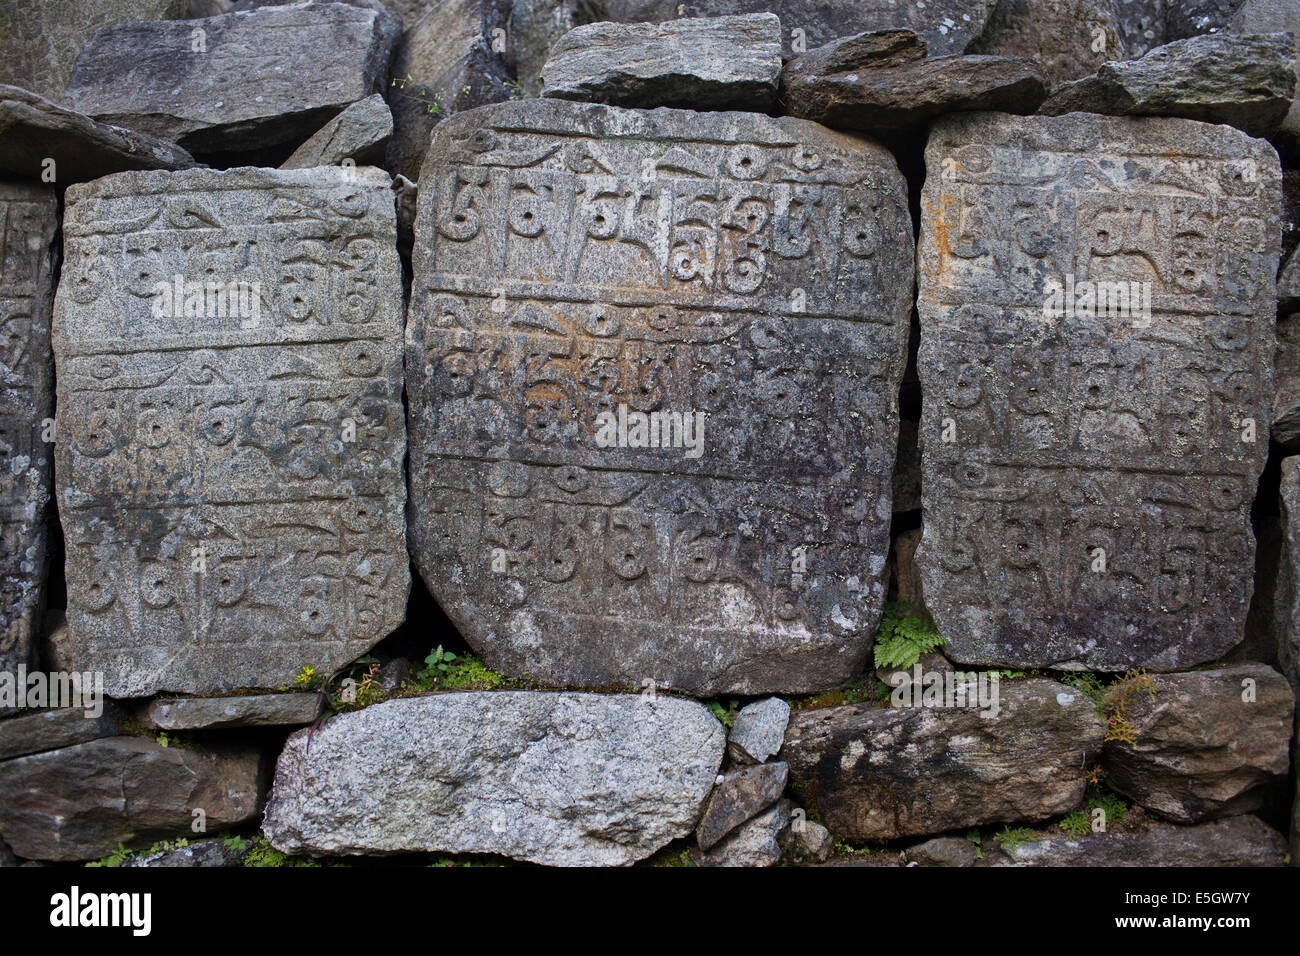 Carved Mani Stone Tablets with double inscription Om Mani Padme Hum in the Everest region of Nepal Stock Photo